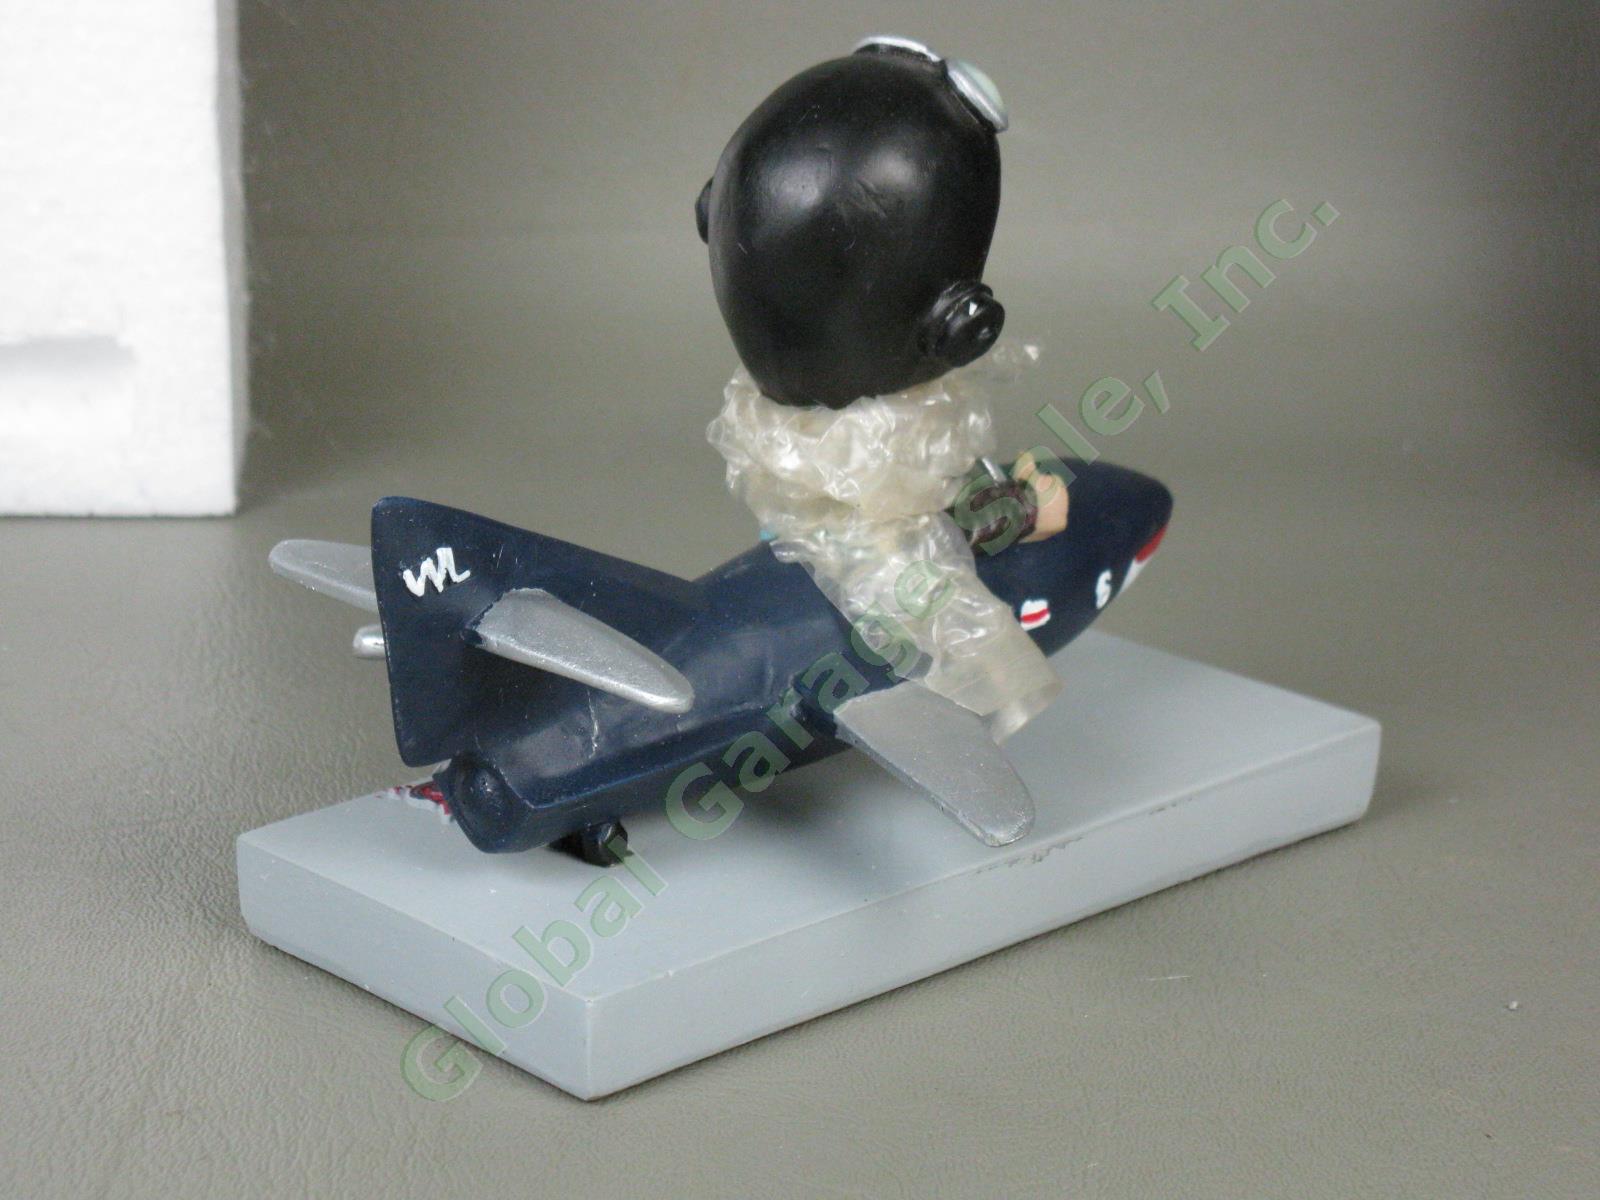 Rare NIB Ted Williams Lowell Spinners Red Sox WWII Jet Pilot Bobblehead 7/1/2008 4